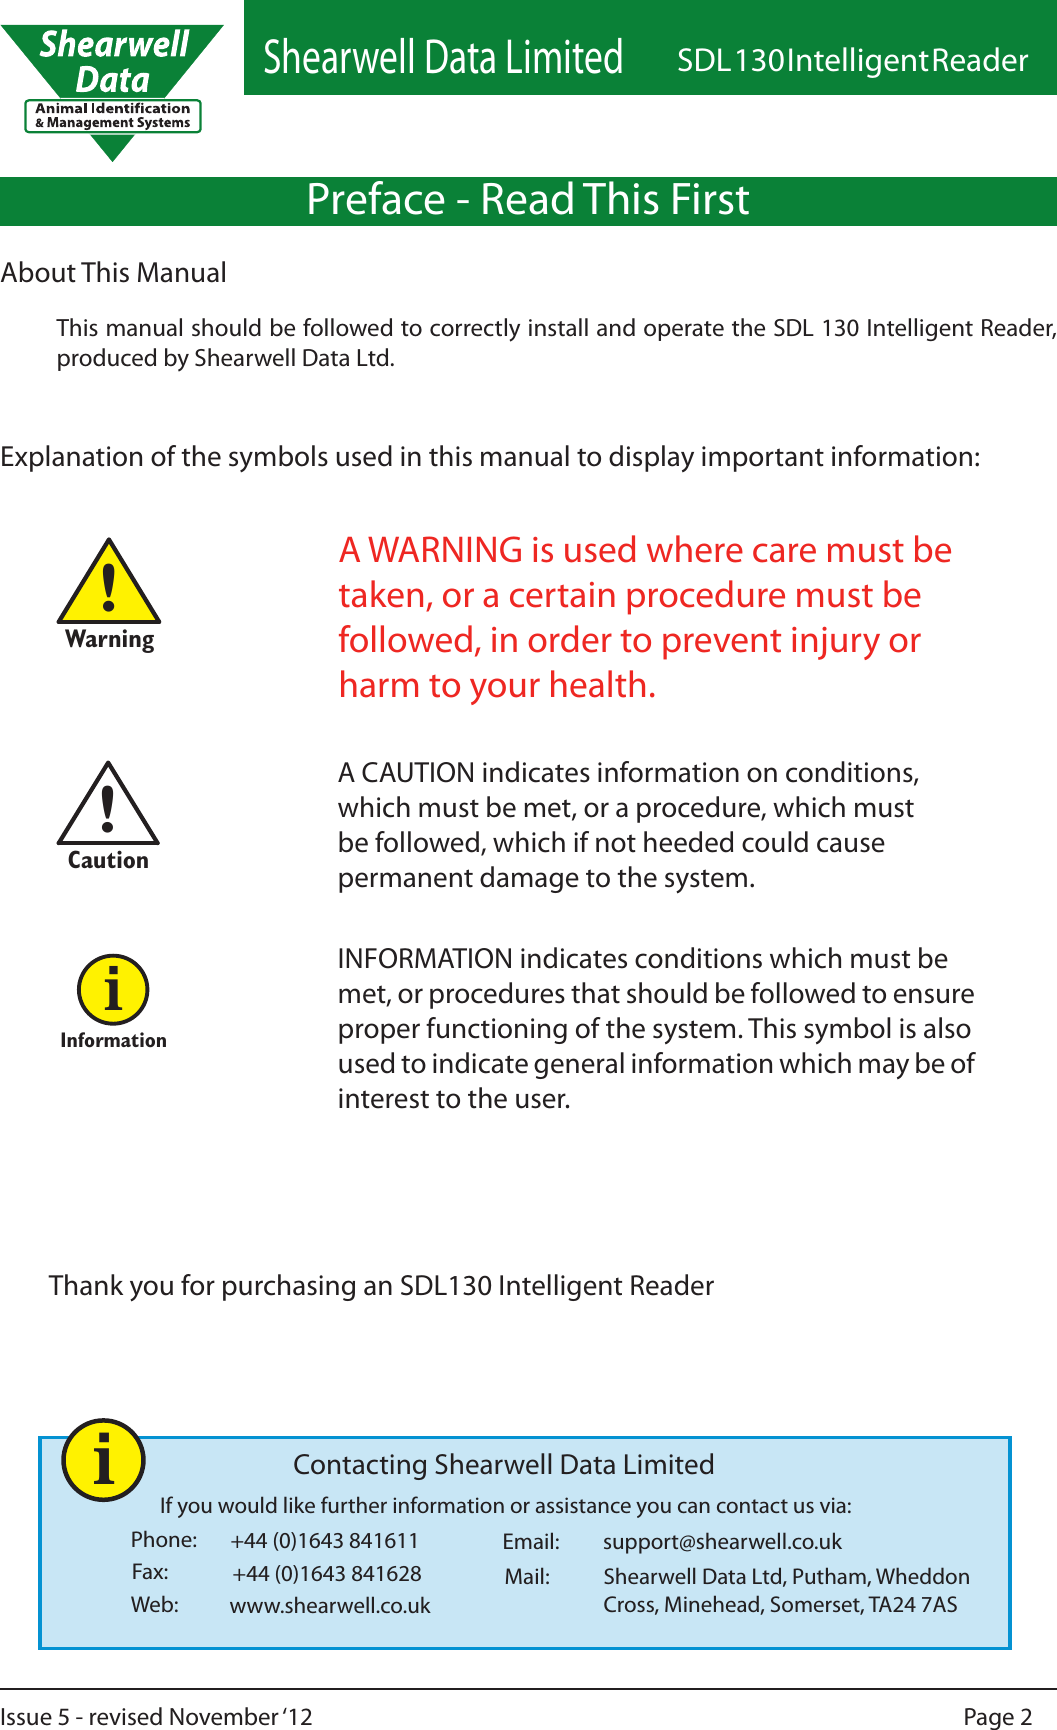 Shearwell Data LimitedSDL 130 Intelligent ReaderPage 2Issue 5 - revised November ‘12!Warning!CautionInformationiPreface - Read This FirstIf you would like further information or assistance you can contact us via:Phone:Fax: Mail:Web:Email:+44 (0)1643 841611Shearwell Data Ltd, Putham, Wheddon Cross, Minehead, Somerset, TA24 7ASwww.shearwell.co.uksupport@shearwell.co.ukContacting Shearwell Data Limited+44 (0)1643 841628About This ManualThis manual should be followed to correctly install and operate the SDL 130 Intelligent Reader, produced by Shearwell Data Ltd.Explanation of the symbols used in this manual to display important information:A WARNING is used where care must be taken, or a certain procedure must be followed, in order to prevent injury or harm to your health.A CAUTION indicates information on conditions, which must be met, or a procedure, which must be followed, which if not heeded could cause permanent damage to the system.INFORMATION indicates conditions which must be met, or procedures that should be followed to ensure proper functioning of the system. This symbol is also used to indicate general information which may be of interest to the user.iThank you for purchasing an SDL130 Intelligent Reader